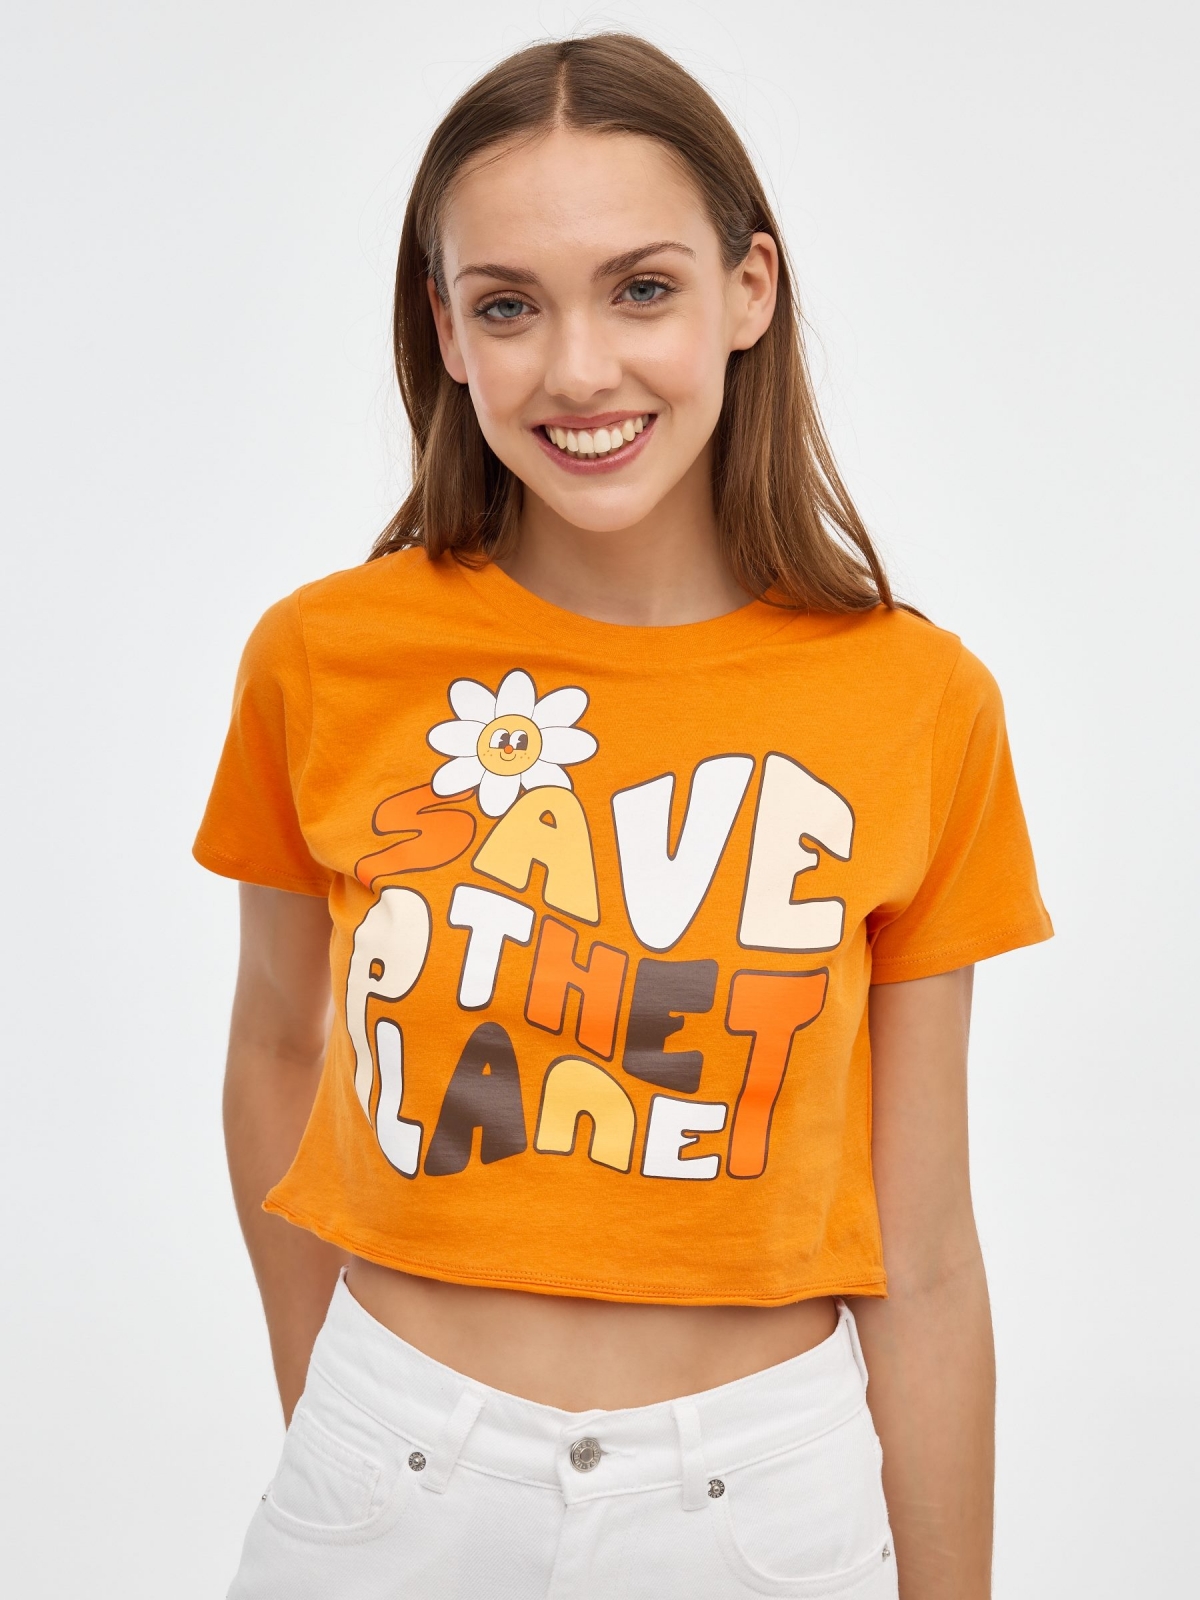 Save the Planet T-shirt orange middle front view